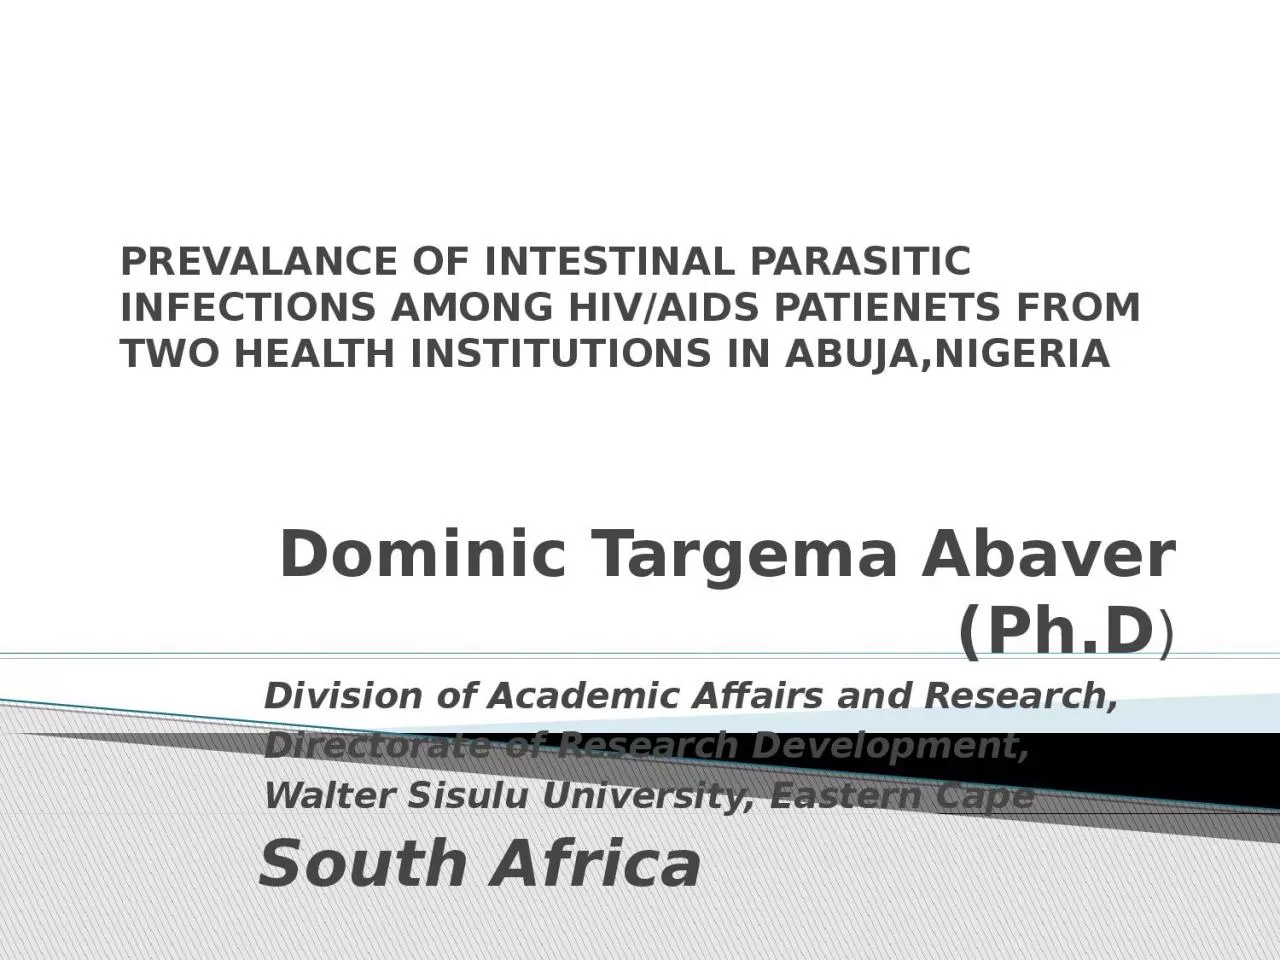 PREVALANCE OF INTESTINAL PARASITIC INFECTIONS AMONG HIV/AIDS PATIENETS FROM TWO HEALTH